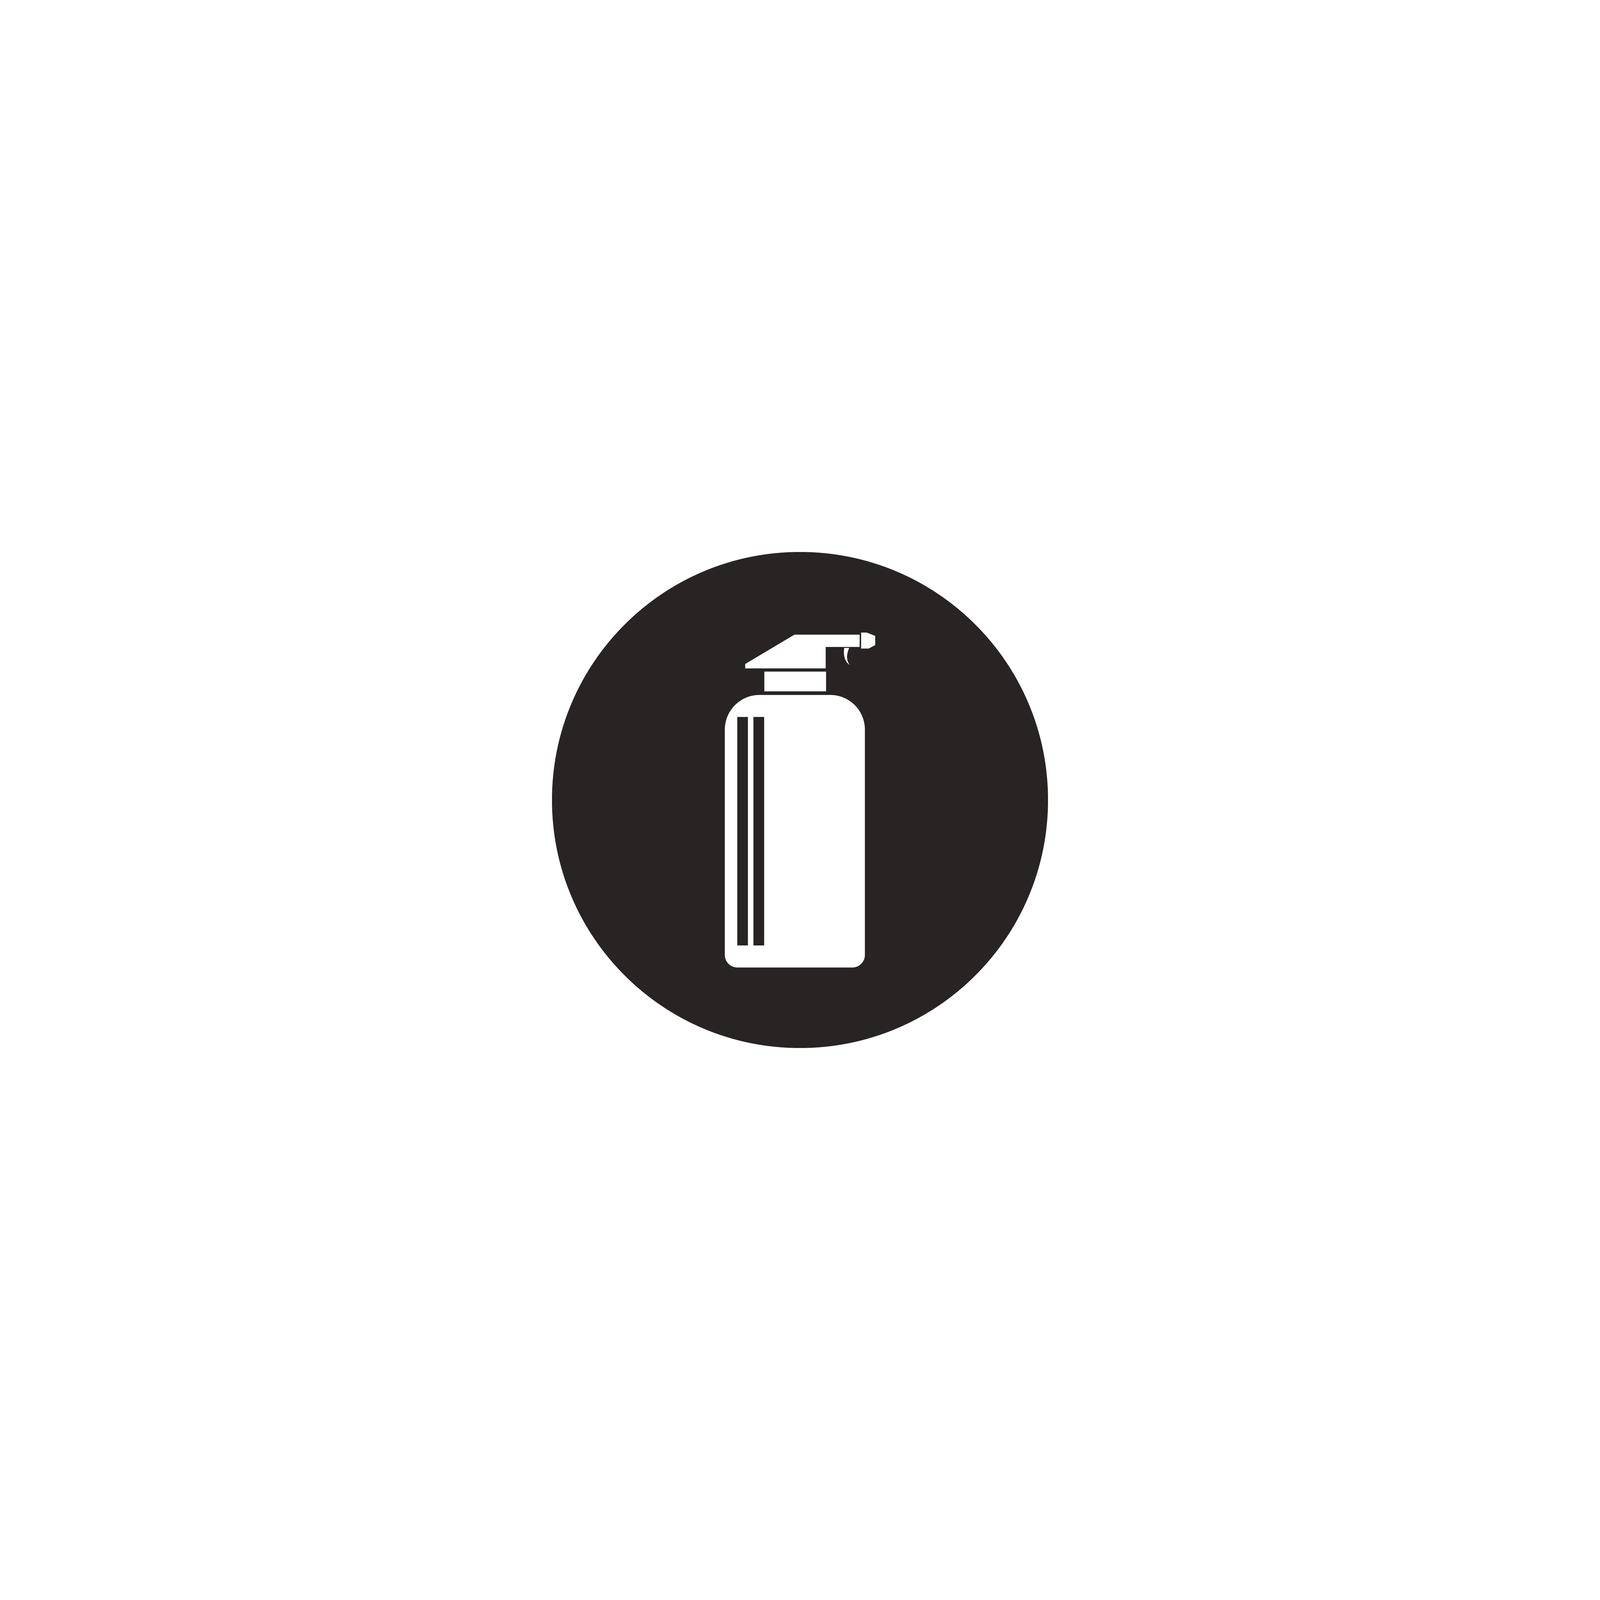 Spray Bottle icon. Simple illustration of bleach spray vector icon for web design isolated on white background